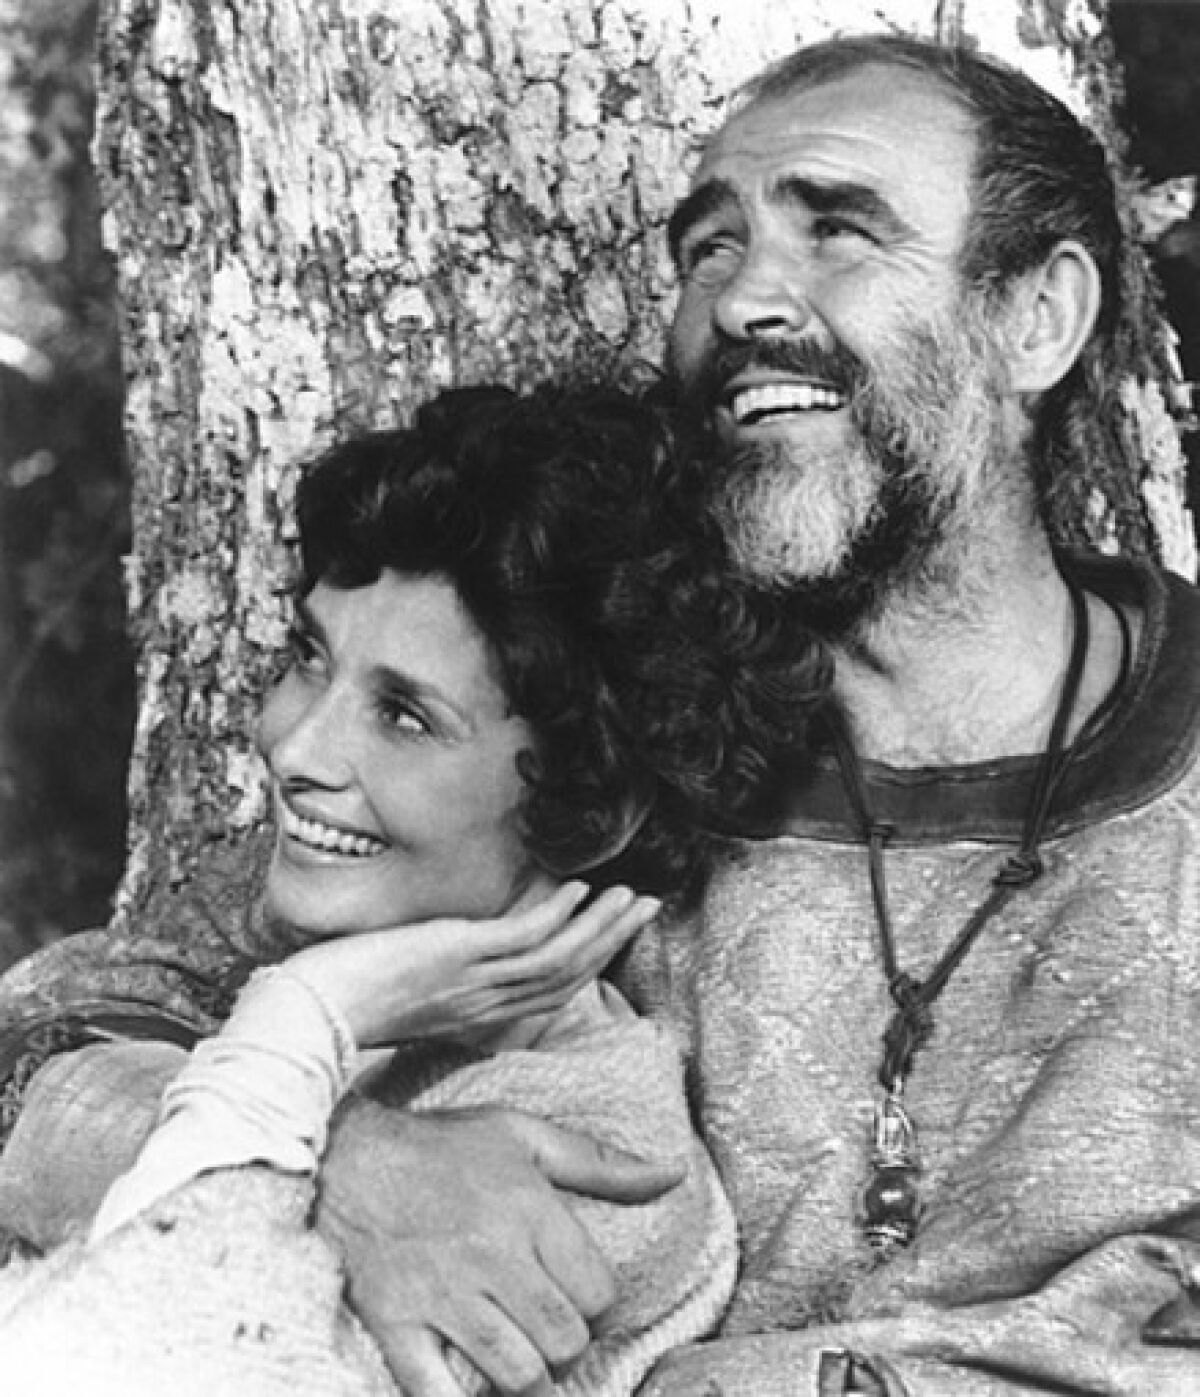 Sean Connery embraces Audrey Hepburn in the movie "Robin and Marian."